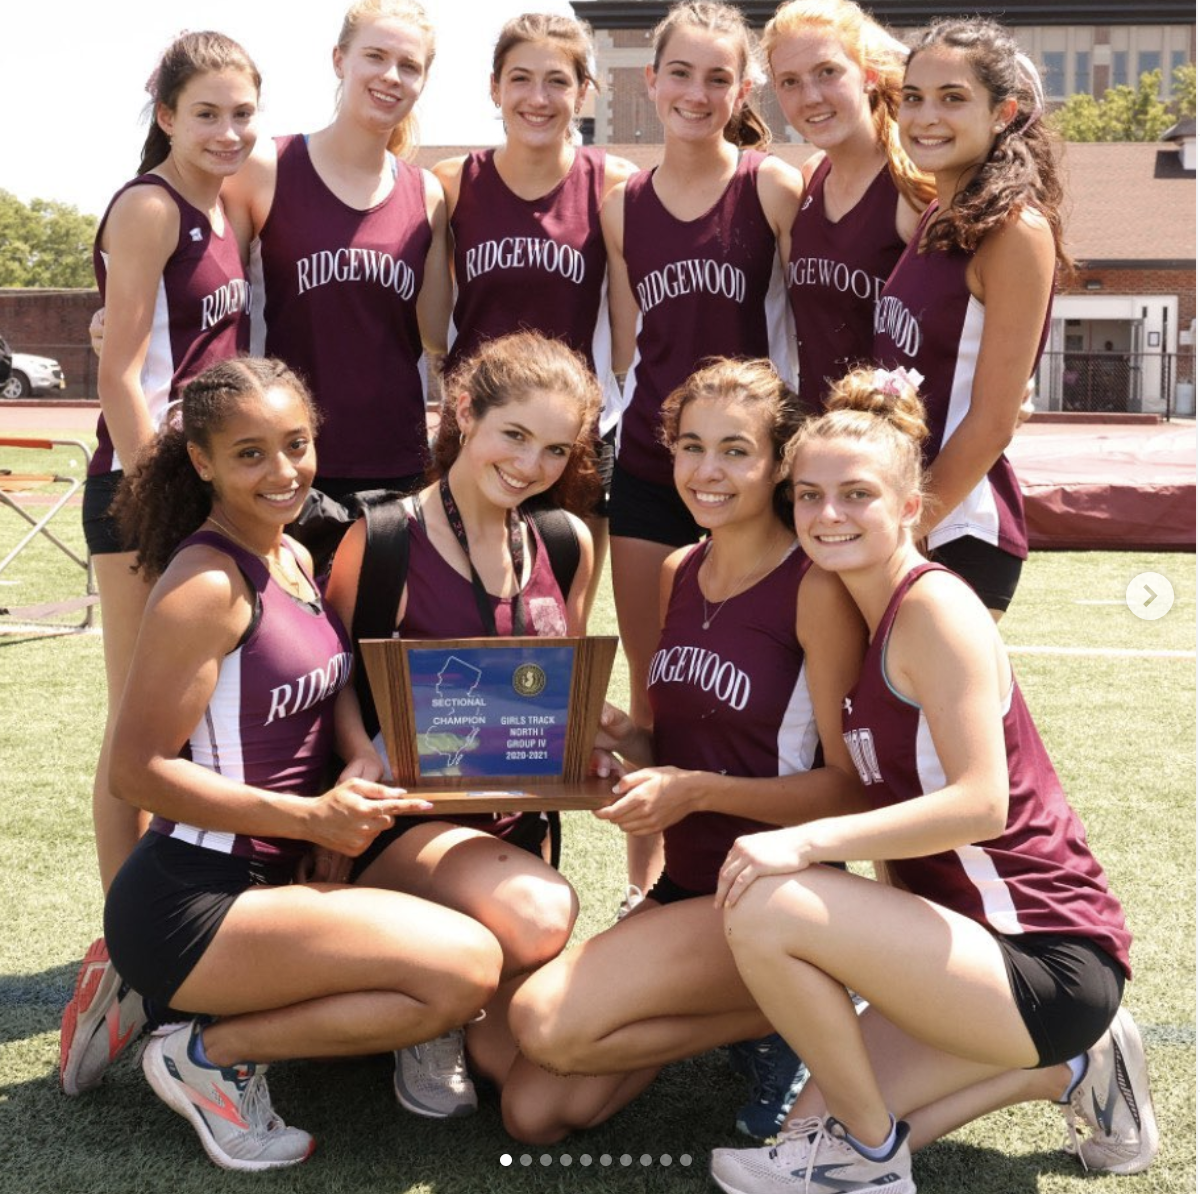 2020 Season Recap: Ridgewood ladies had an extremely successful season winning the county and sectional championship after continued pre season victories in the season opener and dual meets!   Several individuals qualified to the State Group 4 meet including Olivia Grace, Lily Williams, Olivia Shattuck, AnnaMarie Tretola, Sarah Policano, Talia Hutchinson, Lucia Rabolli, Mallory MacDonnell, Alysia Spencer, Fiona Cullen, Hannah Brodsky, the 4x800 relay (Sarah, AnnaMarie, Lily &amp; Lucia), and the 4x100 relay (Olivia, Hannah, Emma Reinke &amp; Alysia)!   Advancing to the State Meet of Champions was Olivia Shattuck, AnnaMarie Tretola, Sarah Policano, Talia Hutchinson, and the 4x800 relay.  At SMOC Sarah and AnnaMarie both earned medals placing top 5 with Talia and Olivia both placing within the top 20!  Next stop: Eugene, Oregon for the National Championship! The Ridgewood girls will be running the 4xMile (Sarah, Olivia S, Lily, &amp; AnnaMarie) as well as the DMR (Sarah, Olivia G, Lucia, &amp; AnnaMarie). photos from NJ Milesplit, Coach Brown &amp; Mrs. Tretola